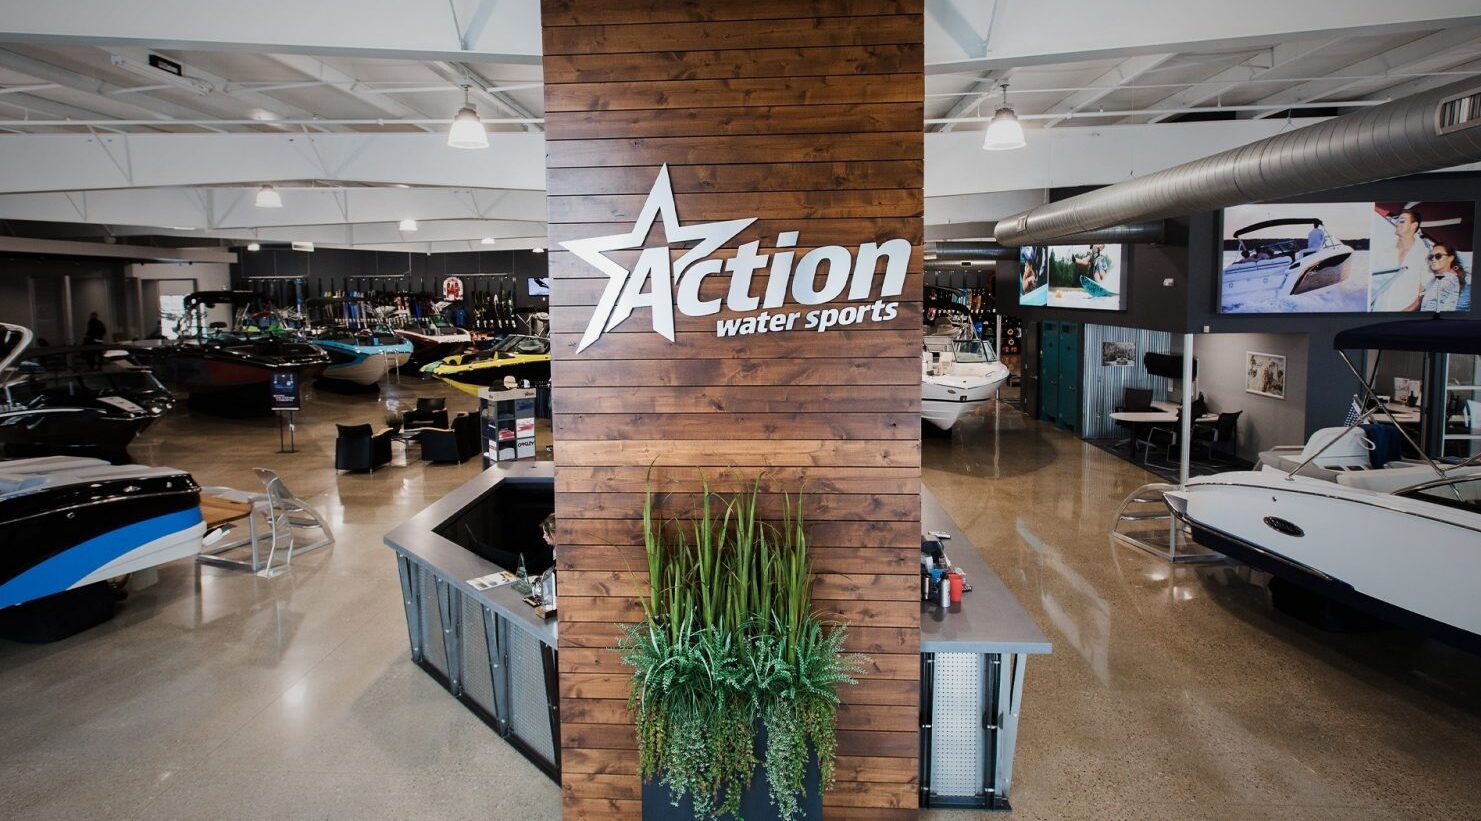 “As we looked to the future, we were seeking a partner who shares our passion for boating and values – and we couldn’t be more pleased to partner with Continuum Ventures and the Doug and Maria DeVos family in the next chapter of growth for Action Water Sports.” – Jerry Brouwer, Founder, Action Water Sports